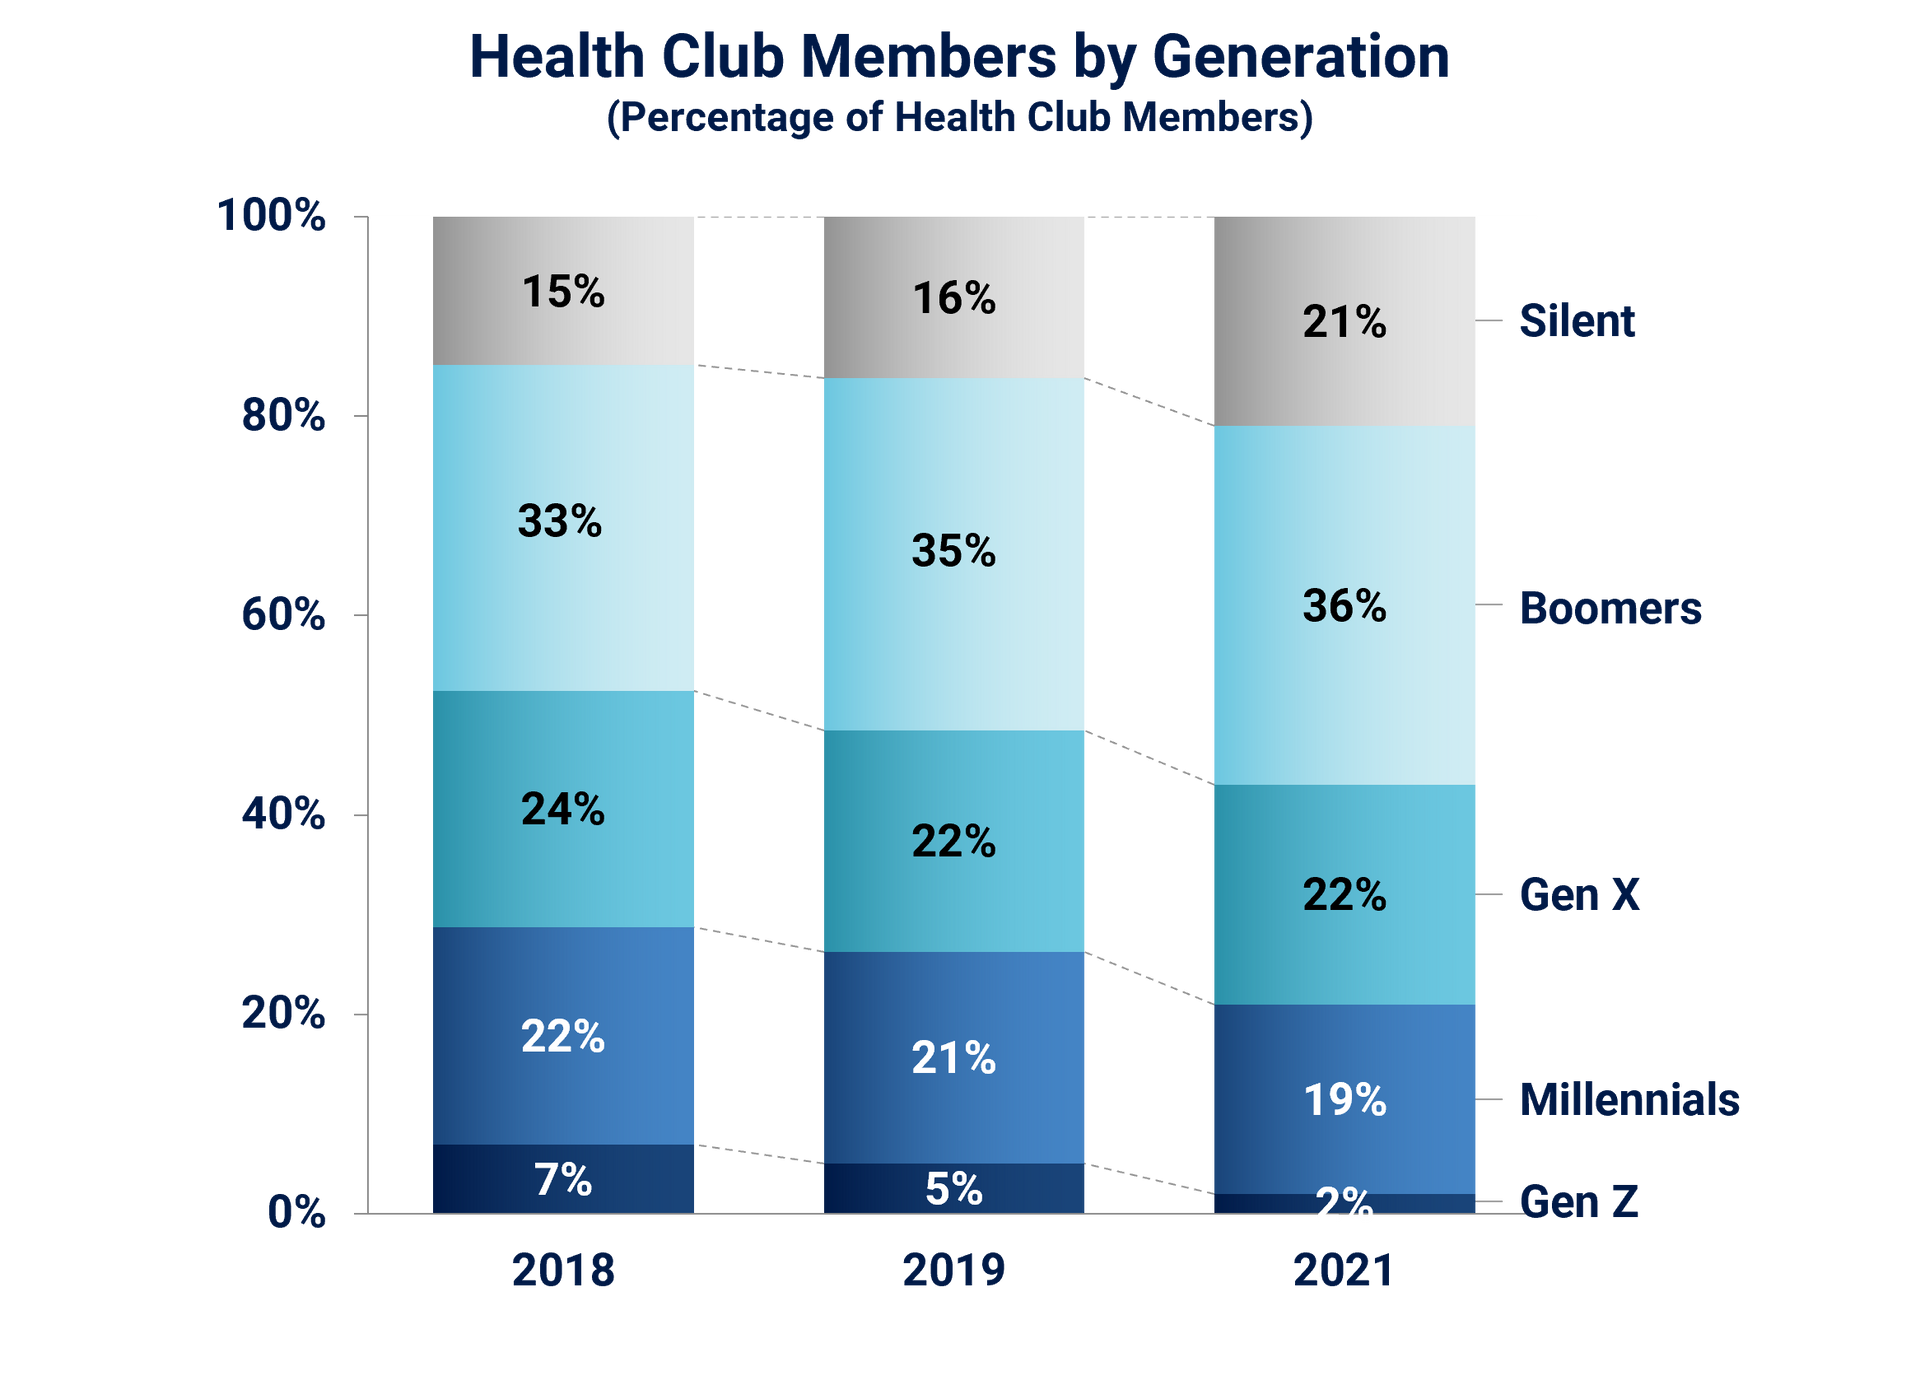 A chart showing the number of health club members by generation.